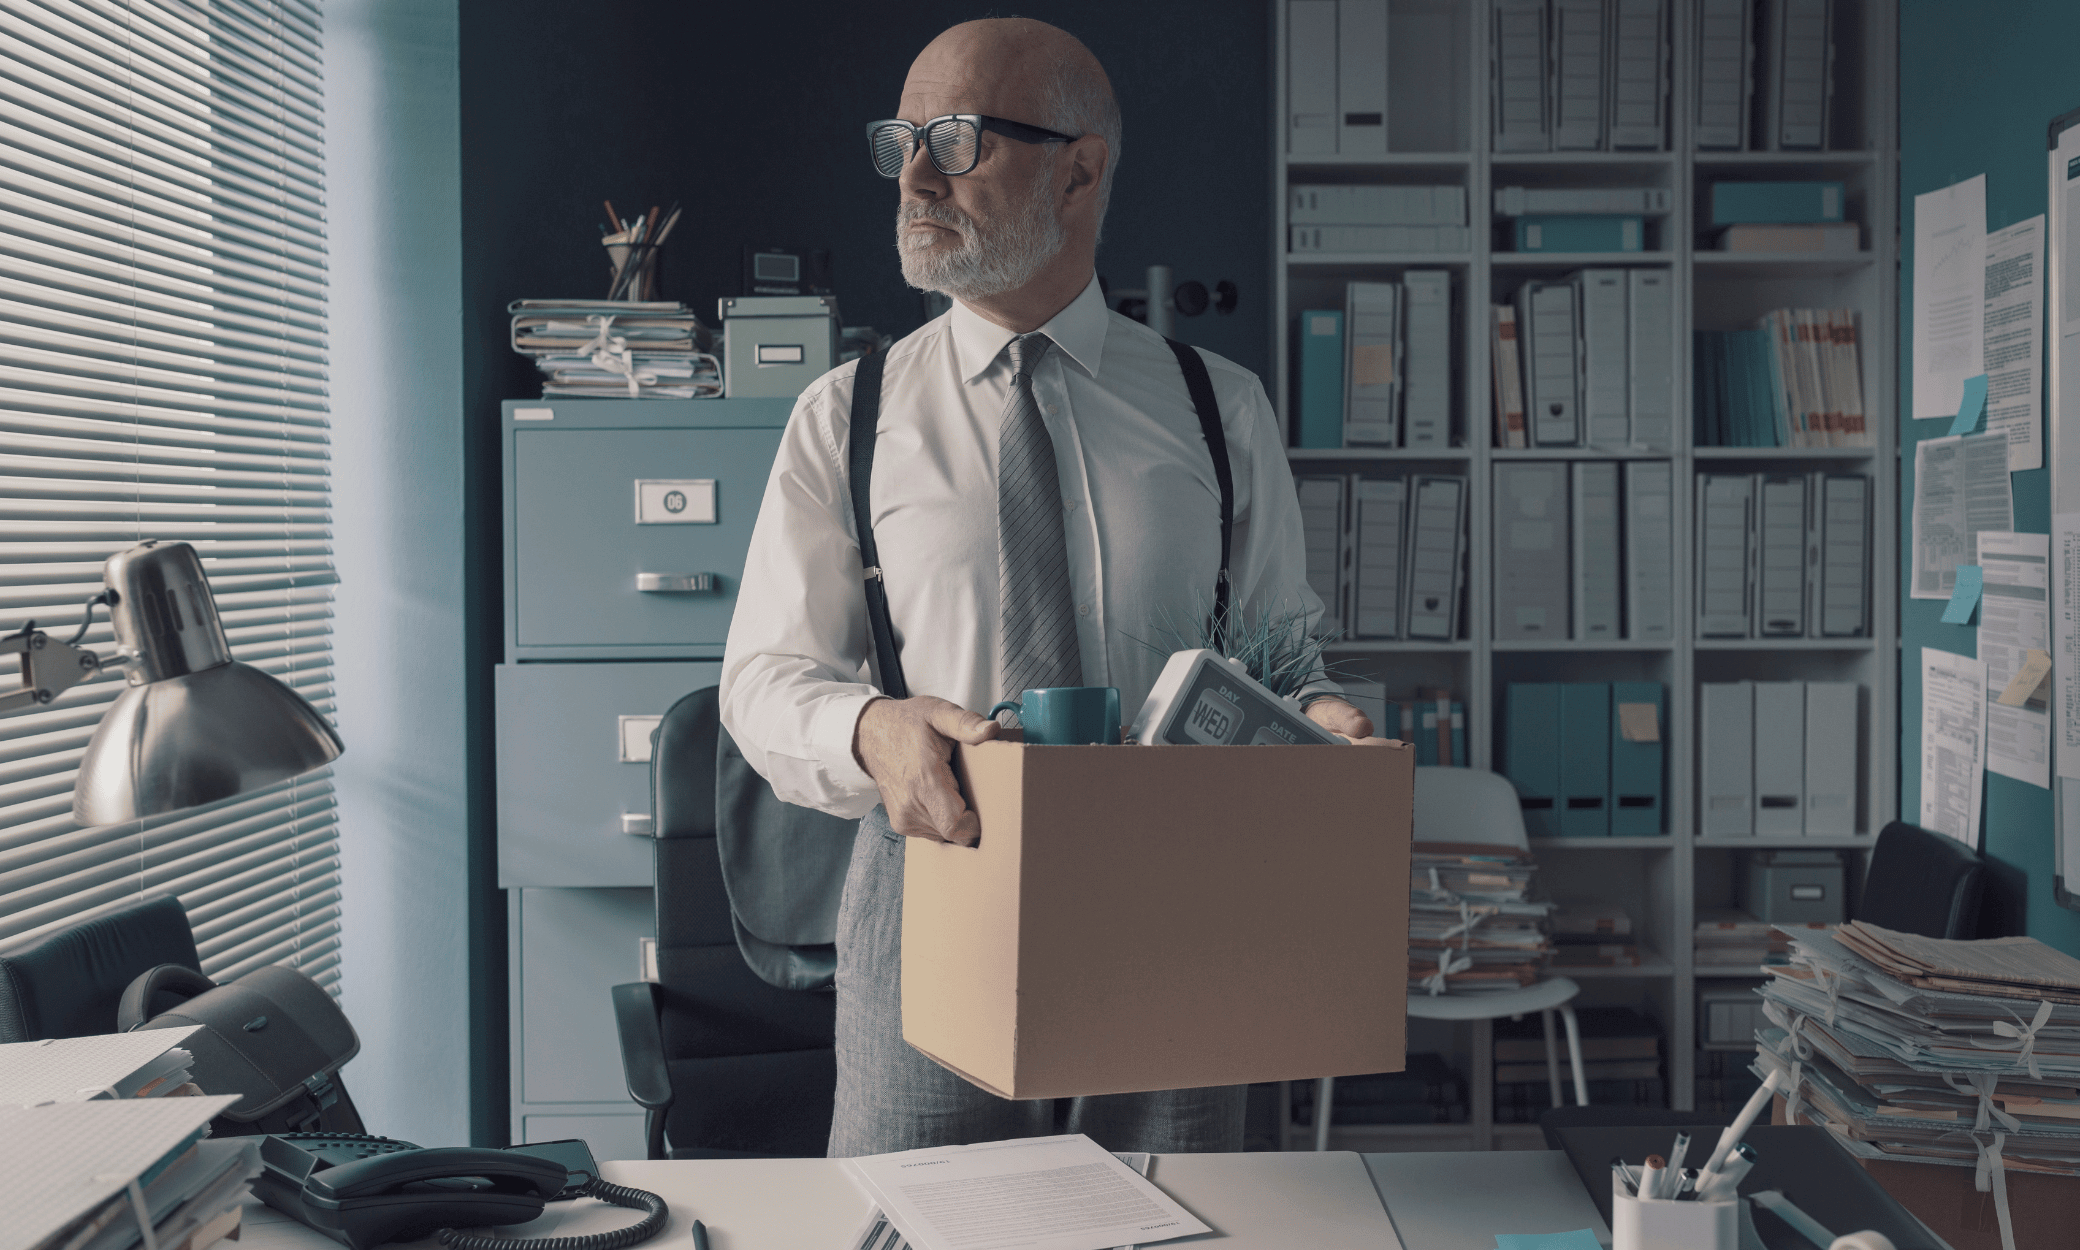 A person holding a box filled with office stuff